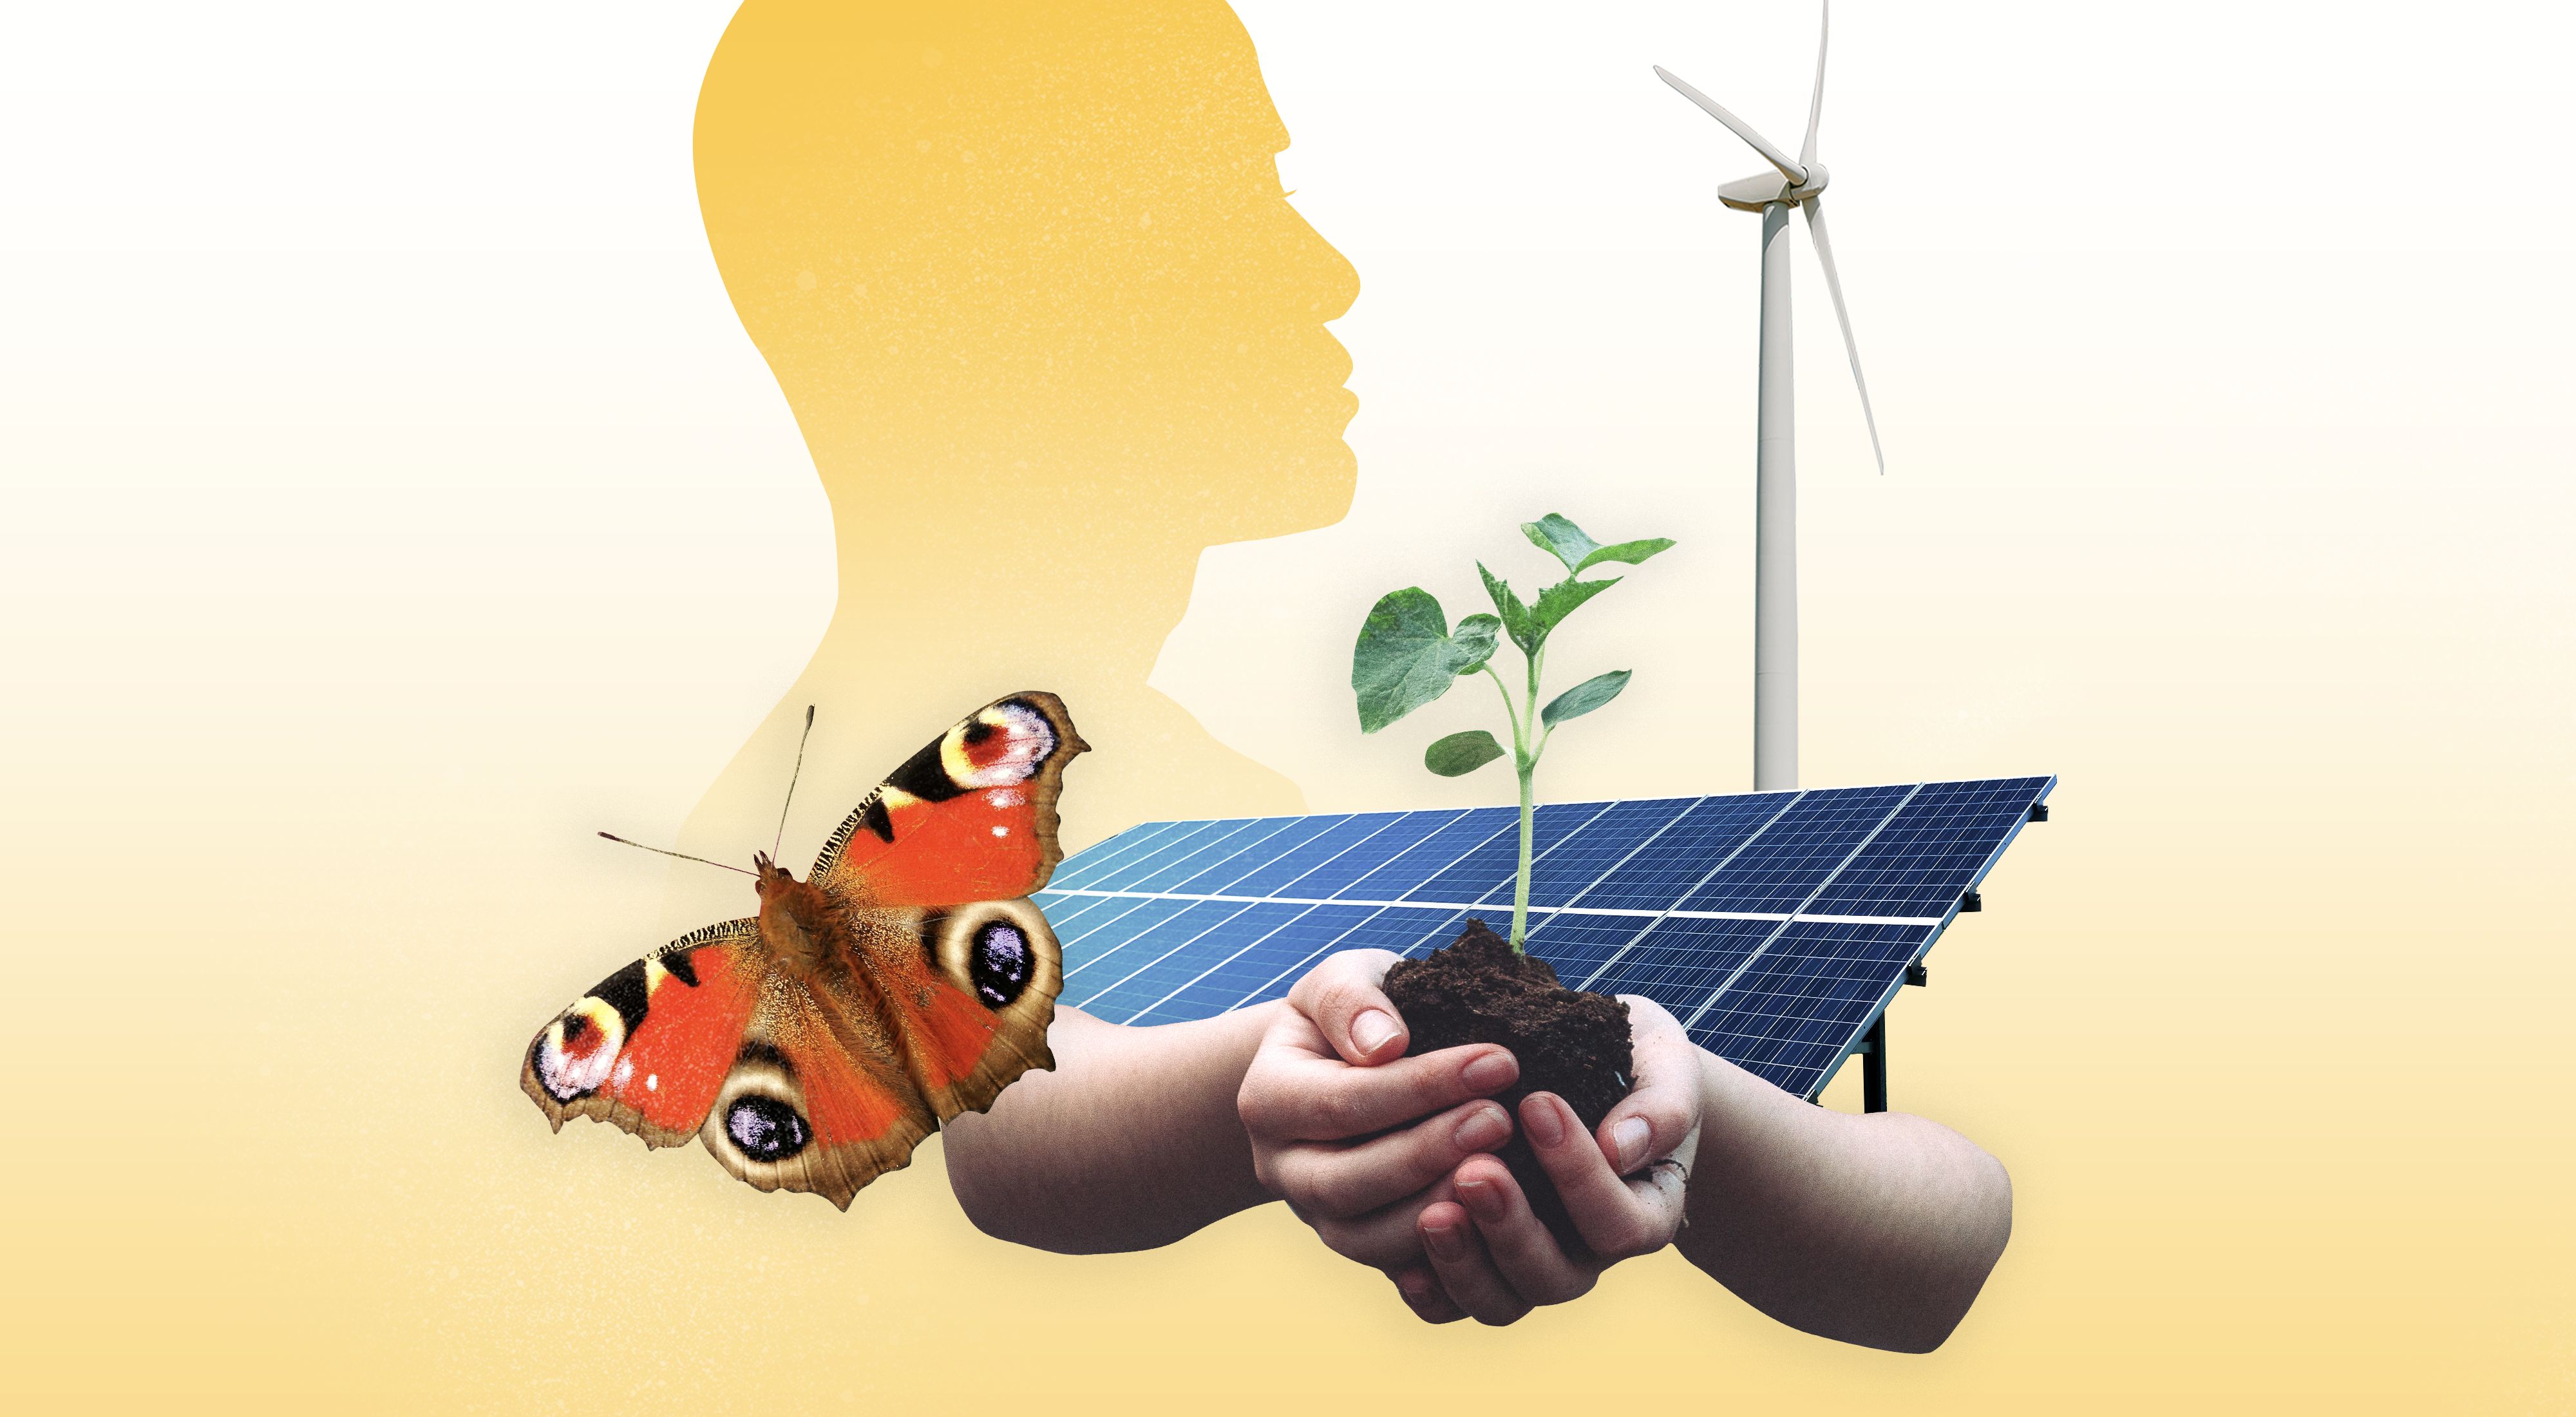 Graphic drawing of a solar panel, wind turbine, butterfly, and plant growing in soil in hands.